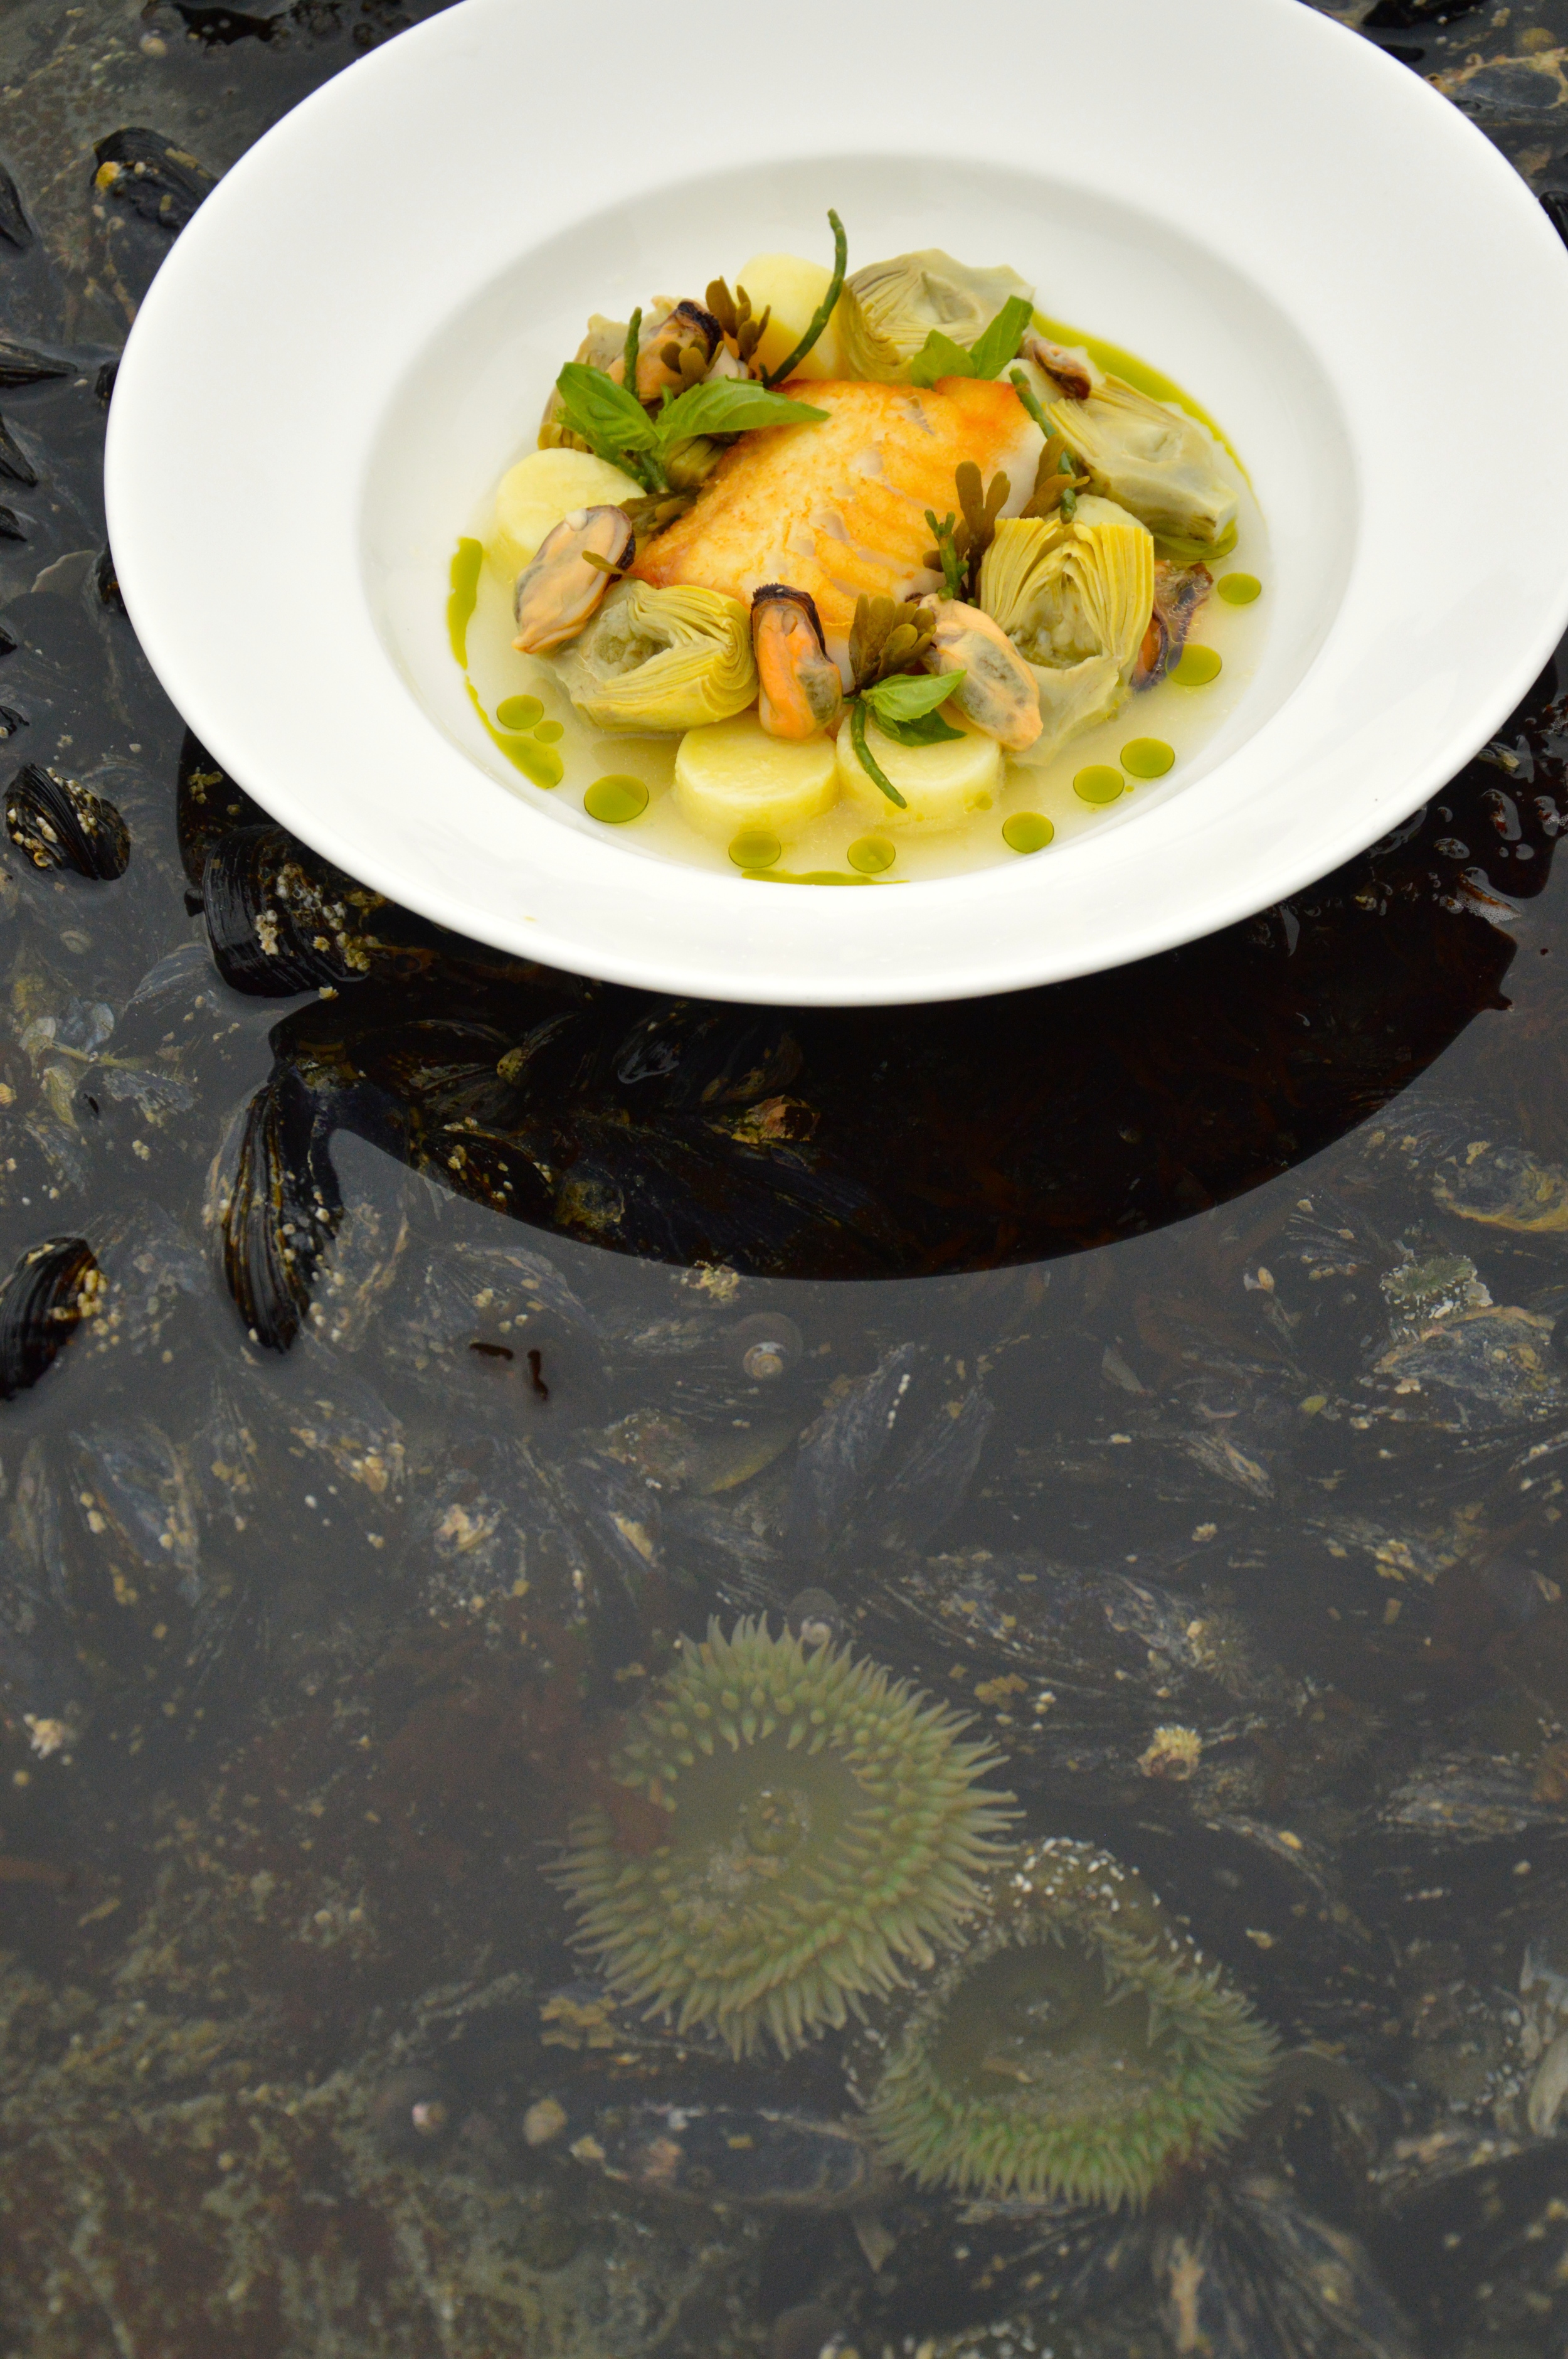 Pacific Sable Fish with Artichokes & Mussels